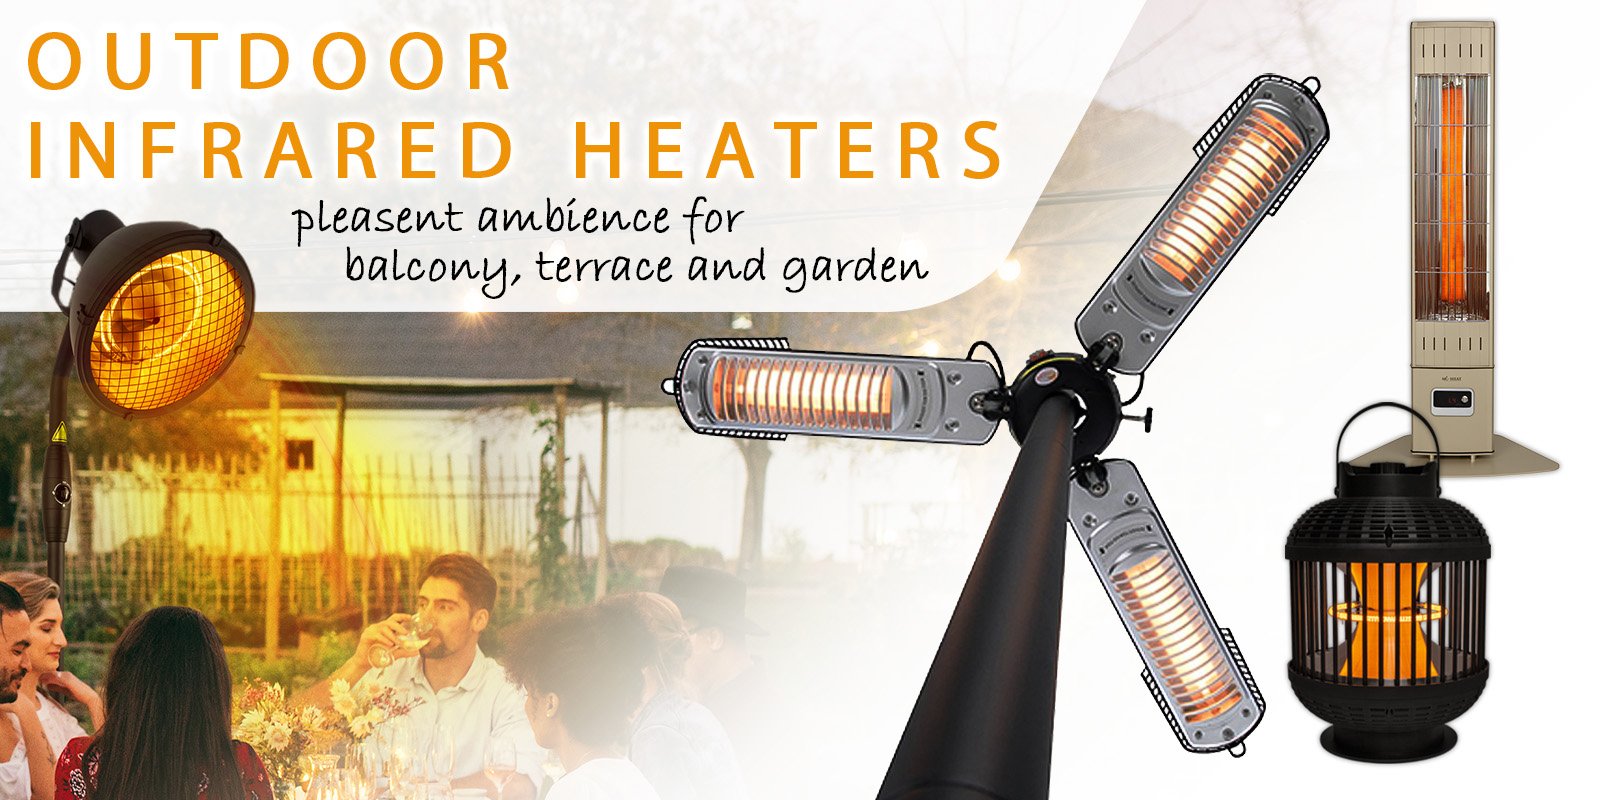 Infrared patio heaters provide a pleasant ambience on balconies, terraces and in the garden.